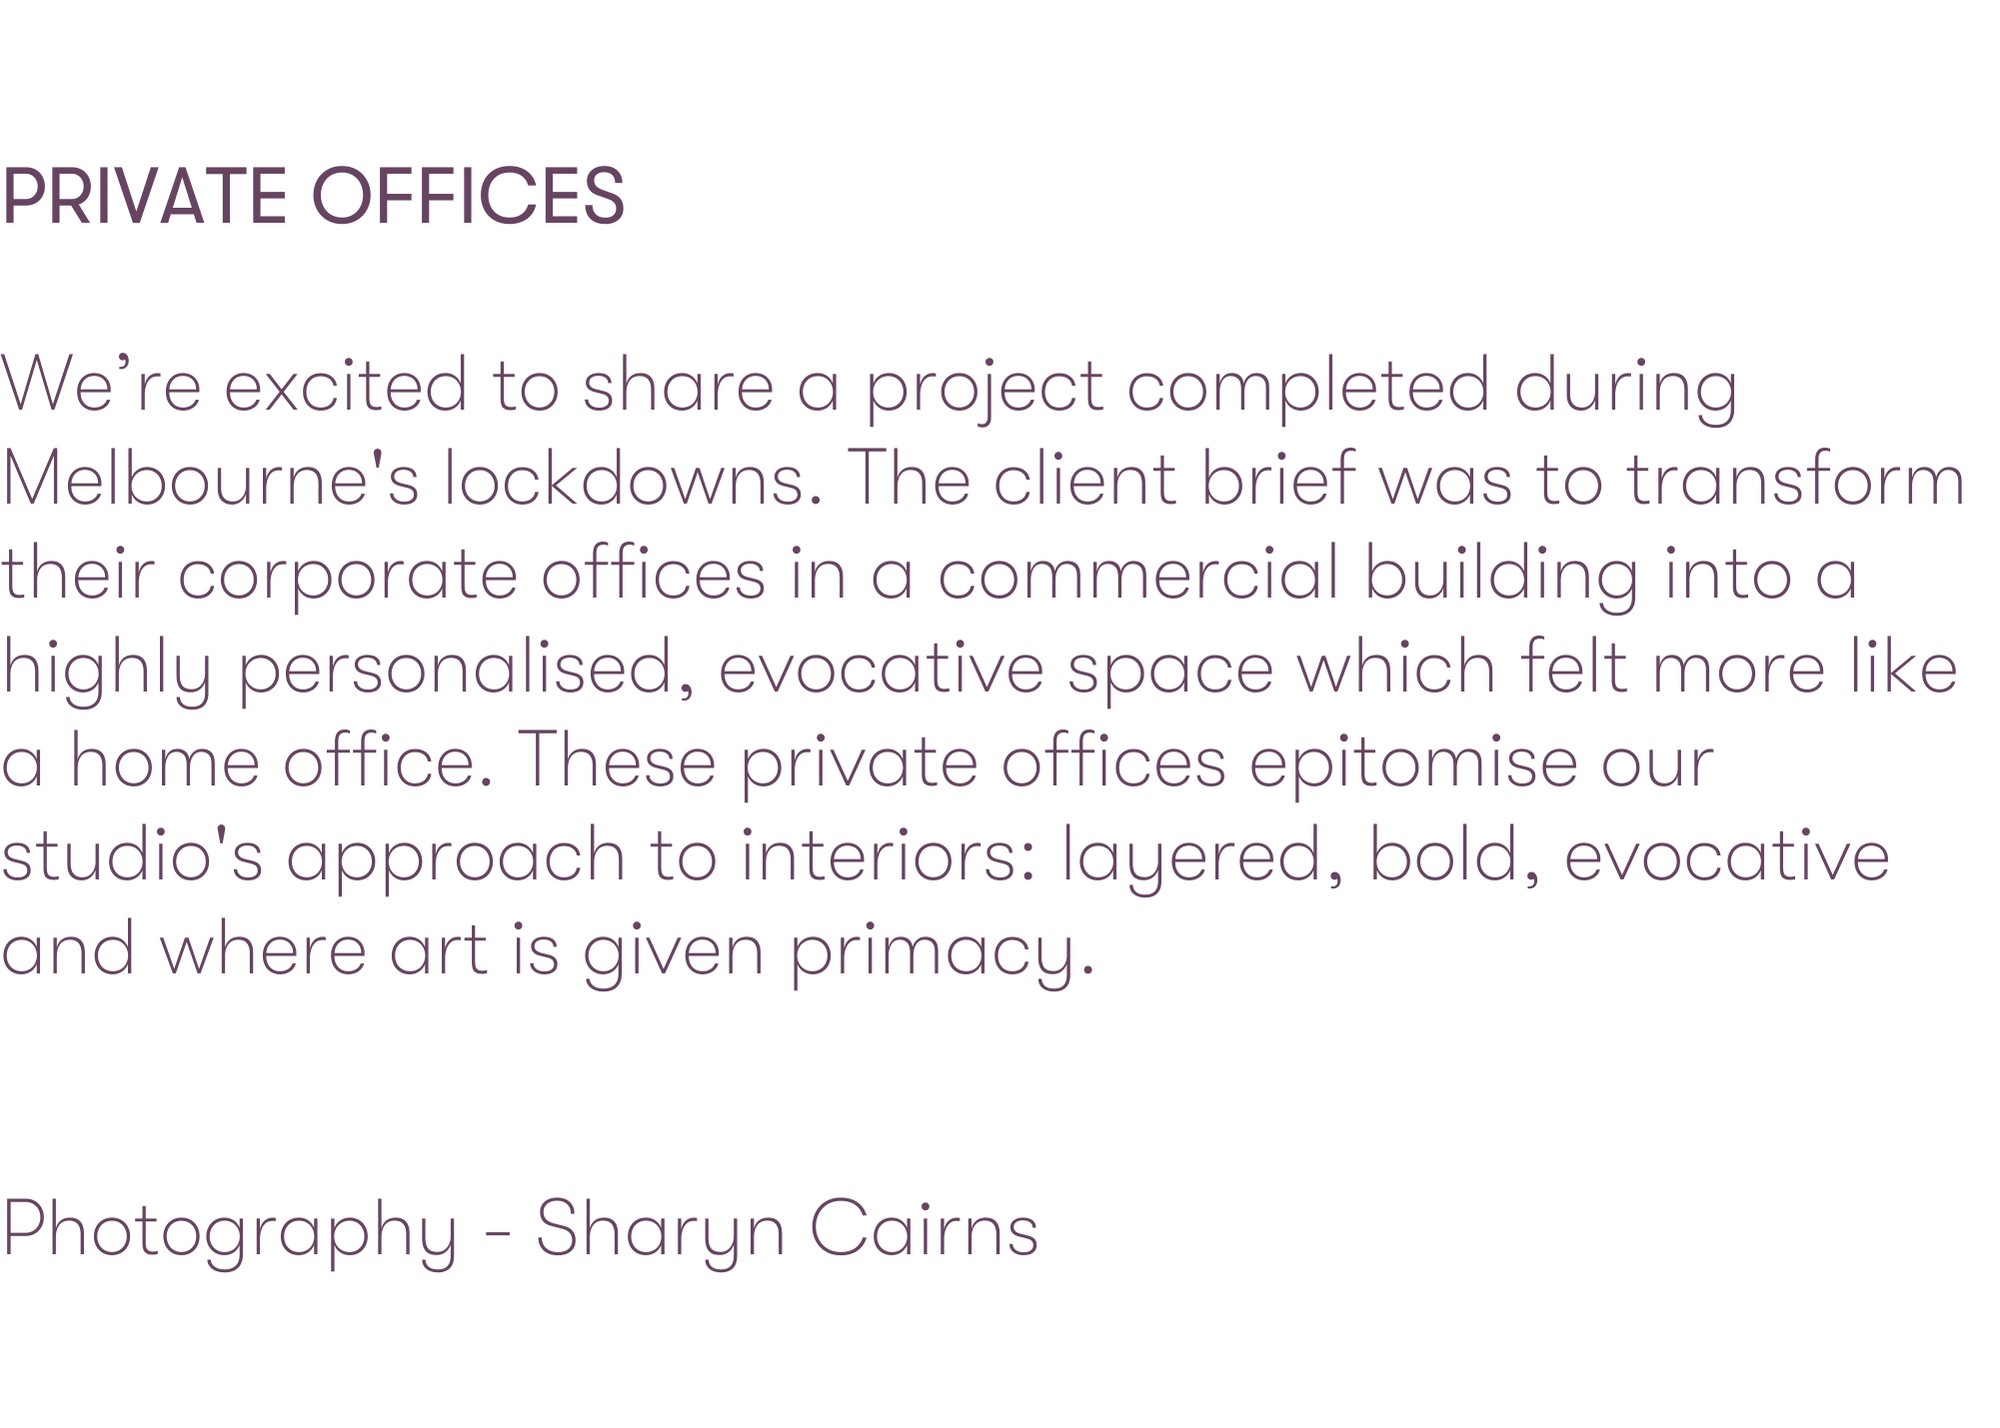 Private Offices - centred.png